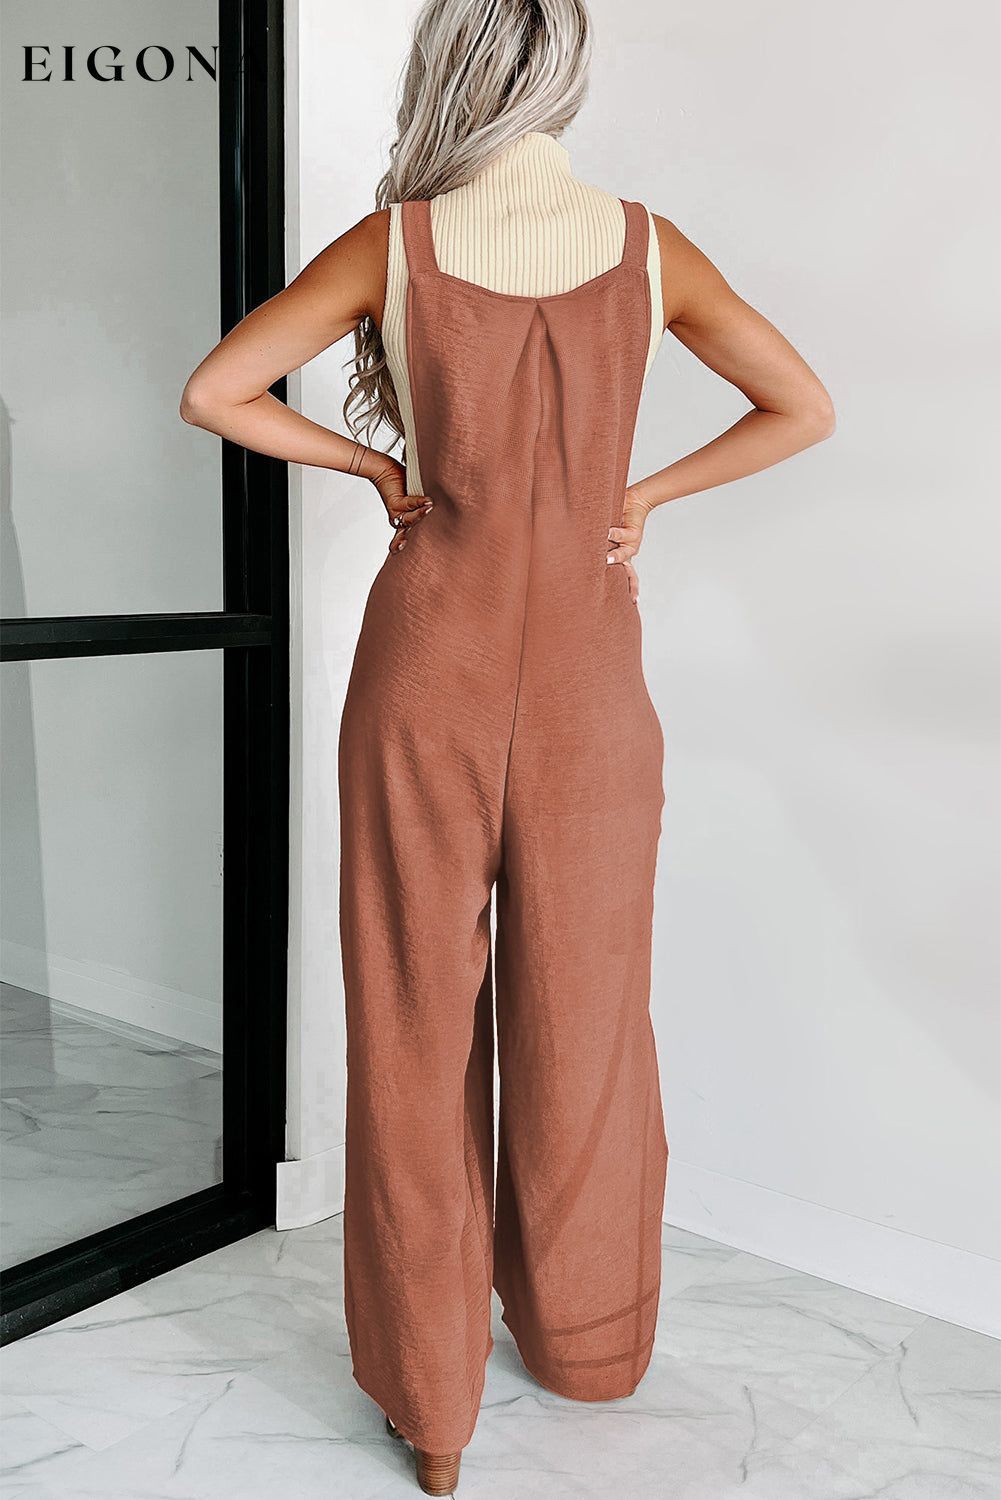 Gold Flame Textured Buttoned Straps Ruched Wide Leg Jumpsuit clothes JUMPSUITS & ROMPERS Rompers